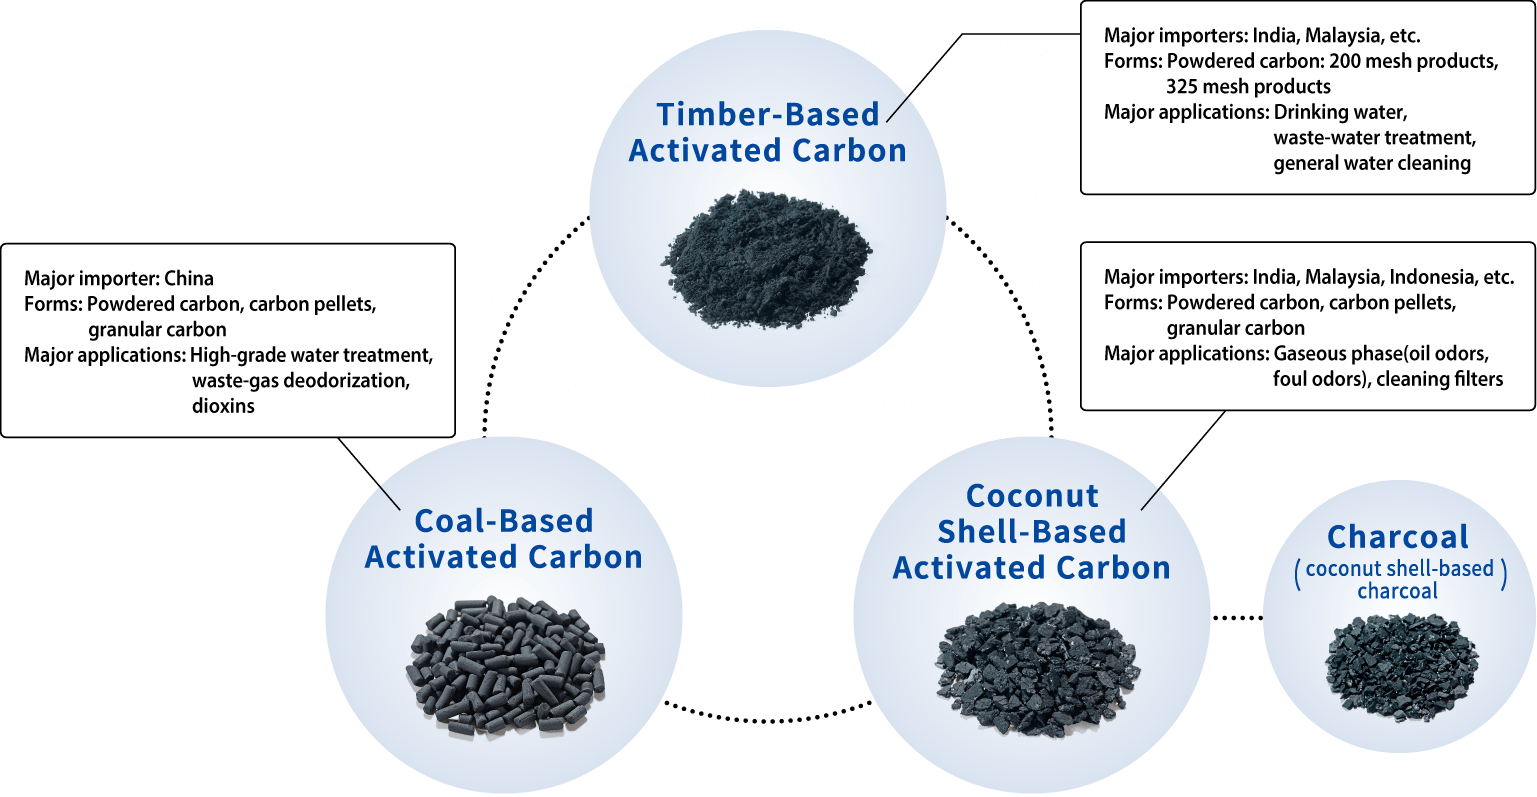 Timber-Based Activated Carbon. Major importers: India, Malaysia, etc. Forms: Powdered Carbon: 200 mesh products, 325 mesh products. Major applications: Drinking water, waste-water treatment, general water cleaning. Coal-Based Activated Carbon. Major importer: China. Forms: Powdered carbon, carbon pellets, ground carbon. Major applications: High-grade water treatment, waste-gas deodorization, dioxins. Coconut Shell-Based Activated Carbon. Major importers: India, Malaysia, Indonesia, etc. Forms: Powdered carbon, carbon pellets, ground carbon. Major applications: Gaseous phase (oil odors, foul odors), cleaning filters. Charcoal (coconut shell-based charcoal)